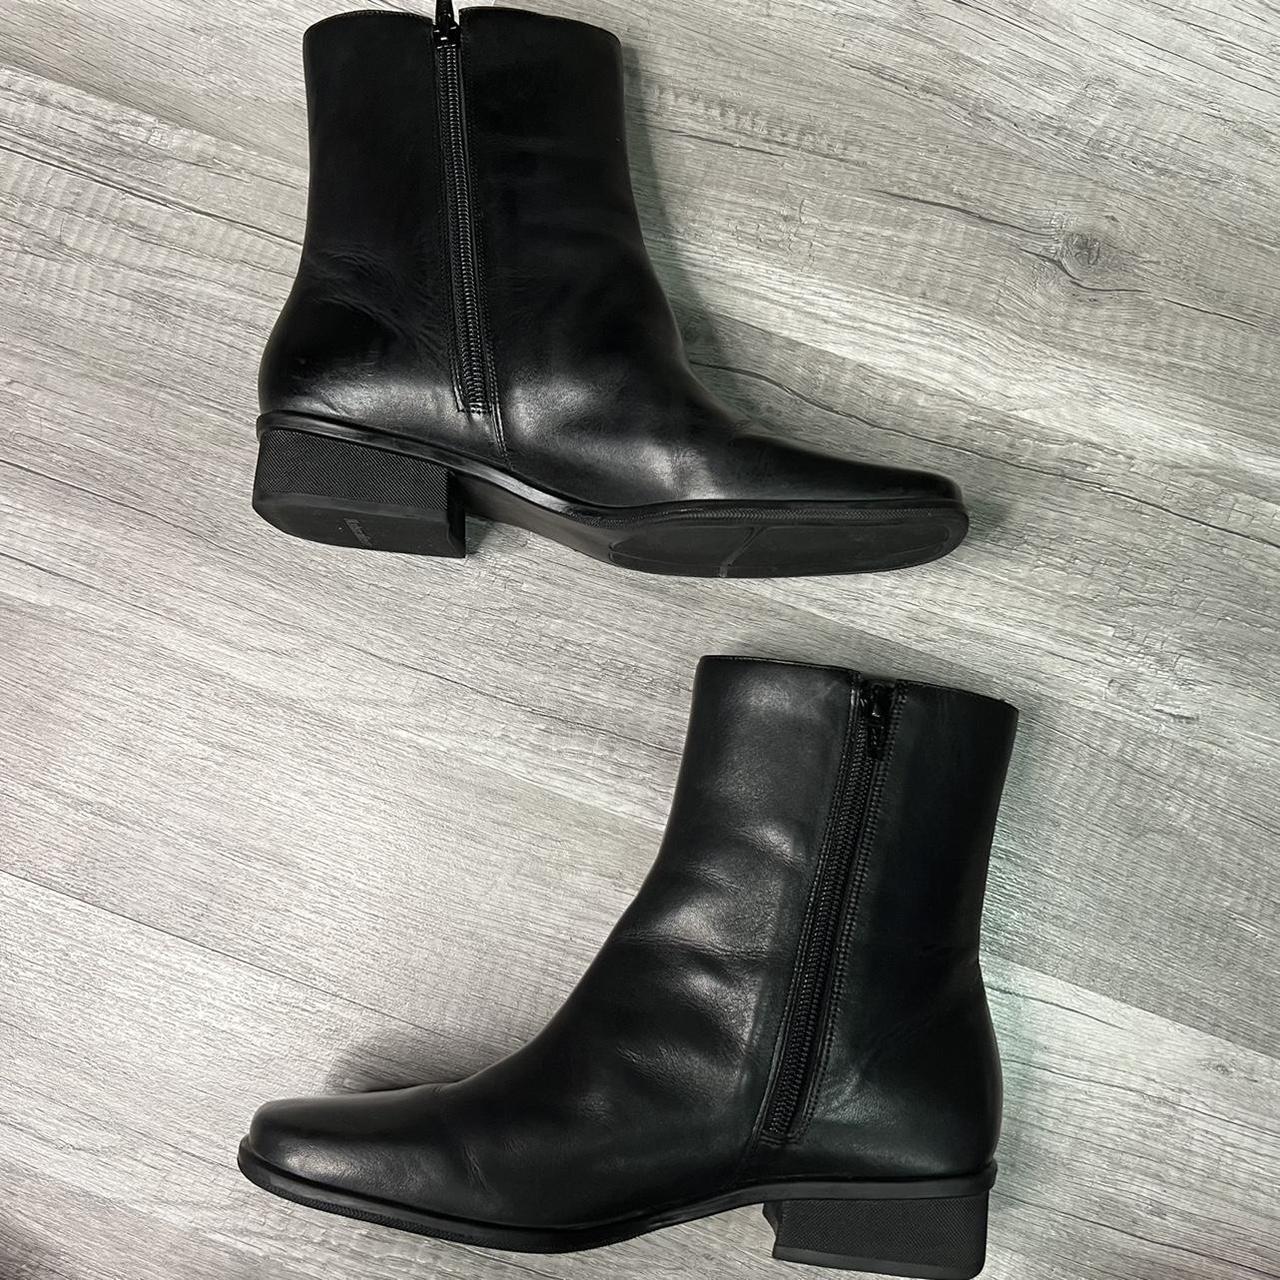 Product Image 3 - Women's 90s Leather Boots 

Black